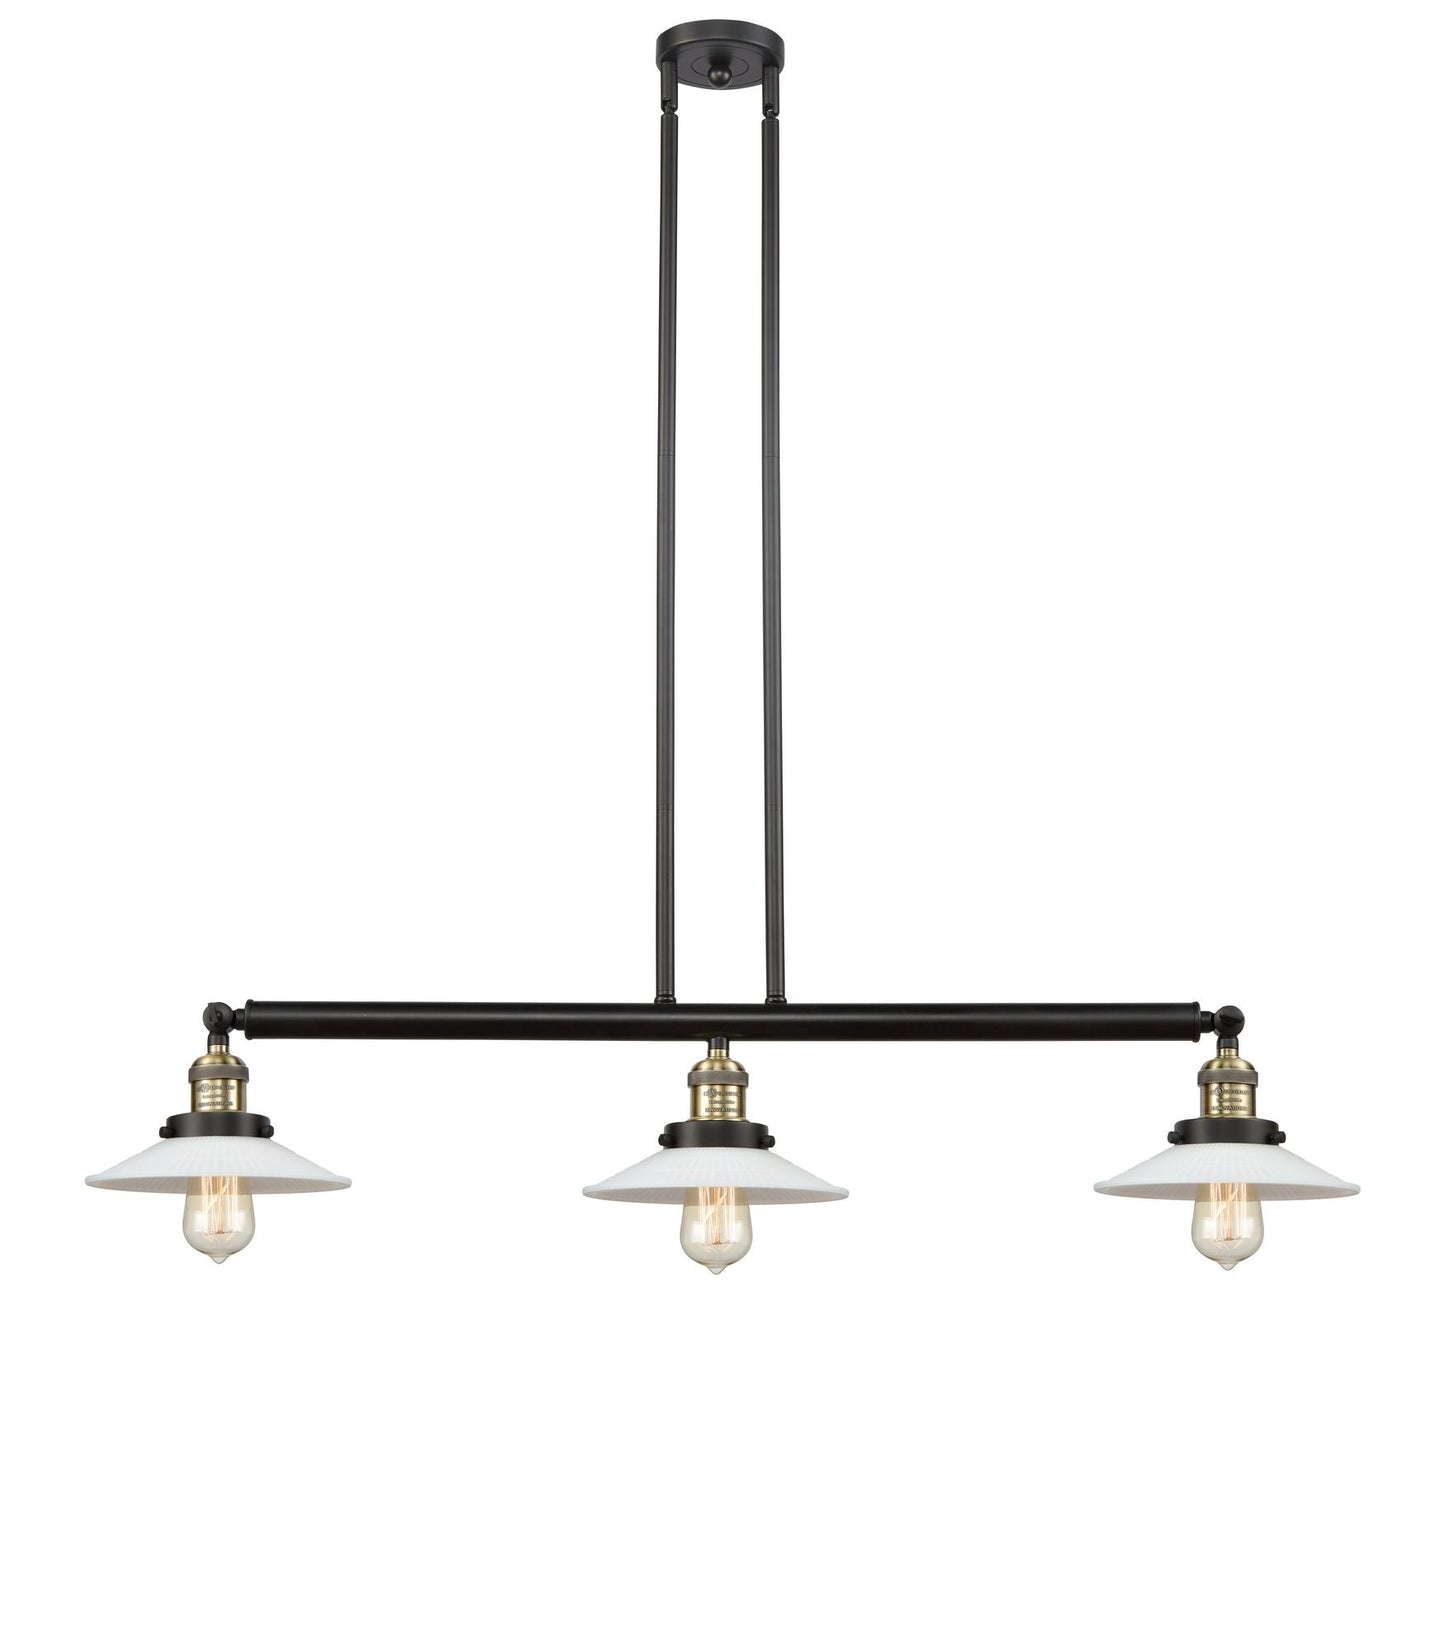 213-BAB-G1 3-Light 41" Black Antique Brass Island Light - White Halophane Glass - LED Bulb - Dimmensions: 41 x 8.5 x 8<br>Minimum Height : 16.25<br>Maximum Height : 40.25 - Sloped Ceiling Compatible: Yes